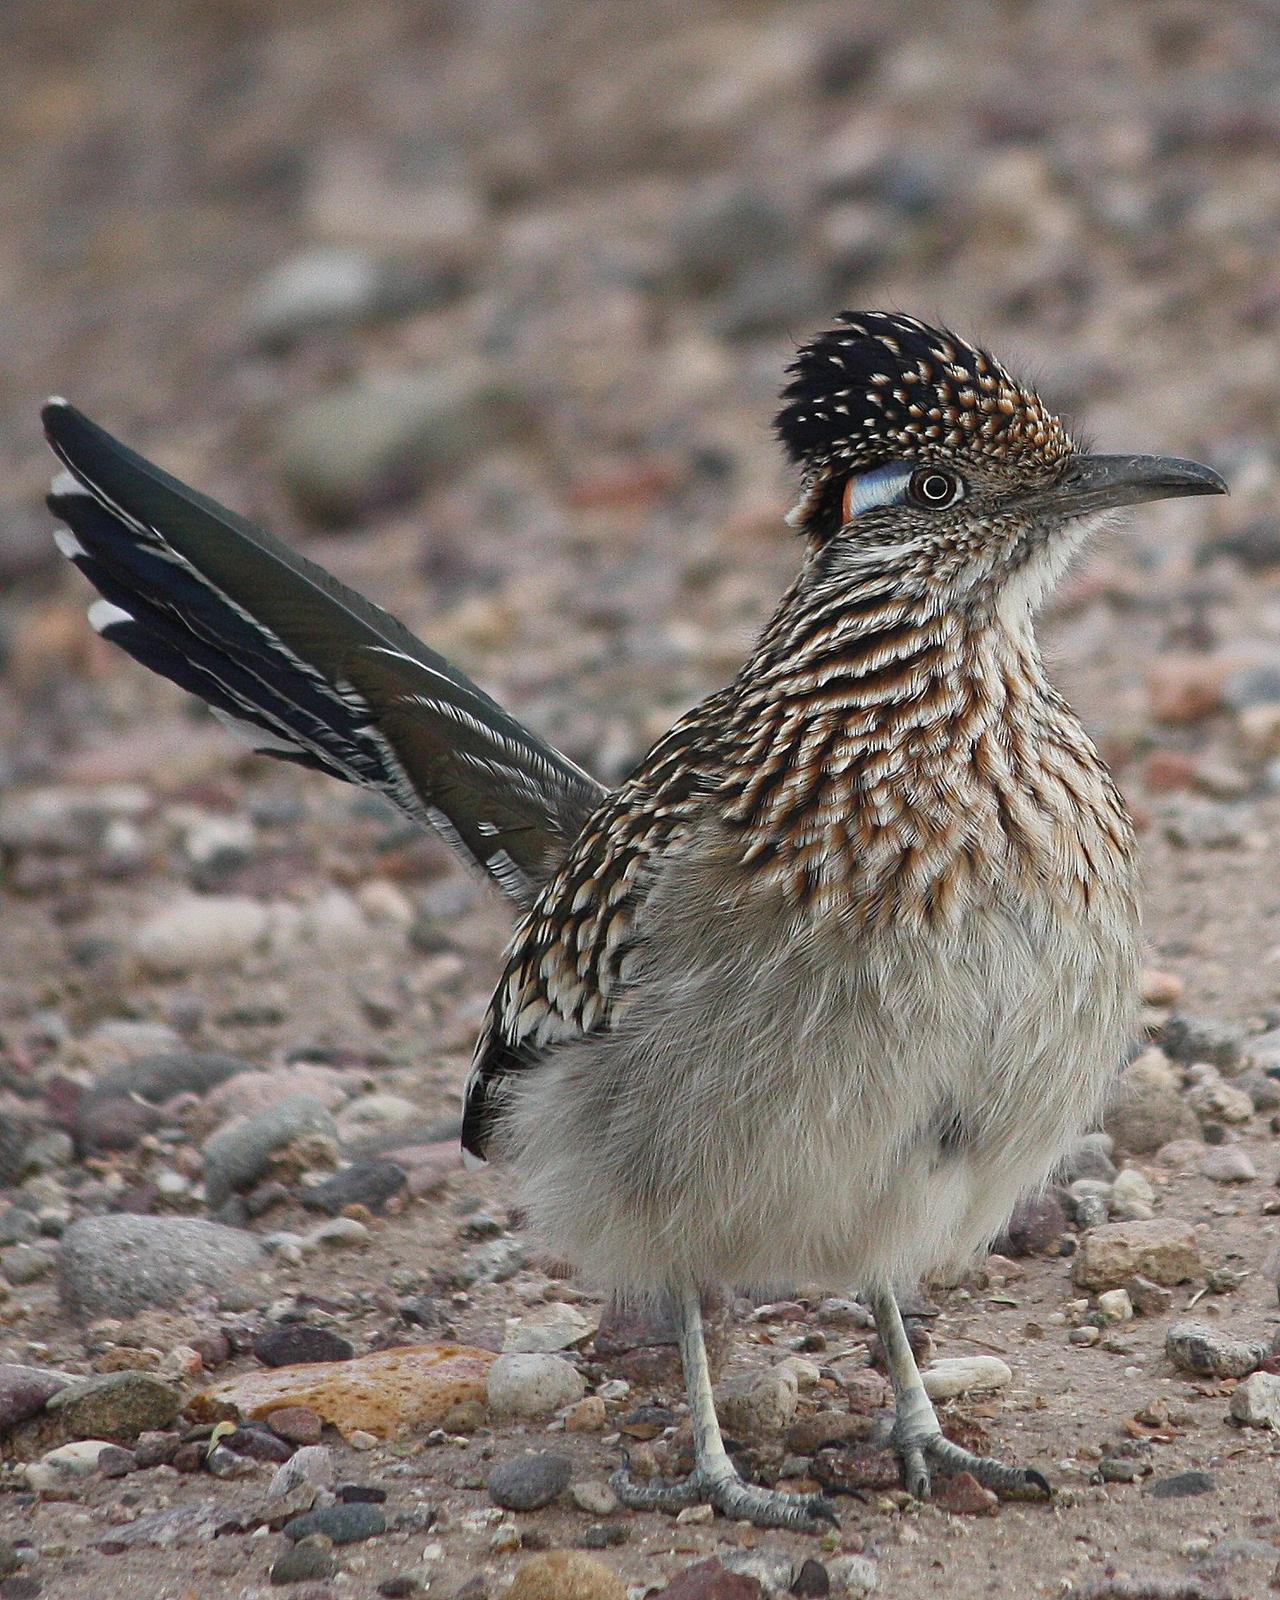 Greater Roadrunner Photo by Andrew Core